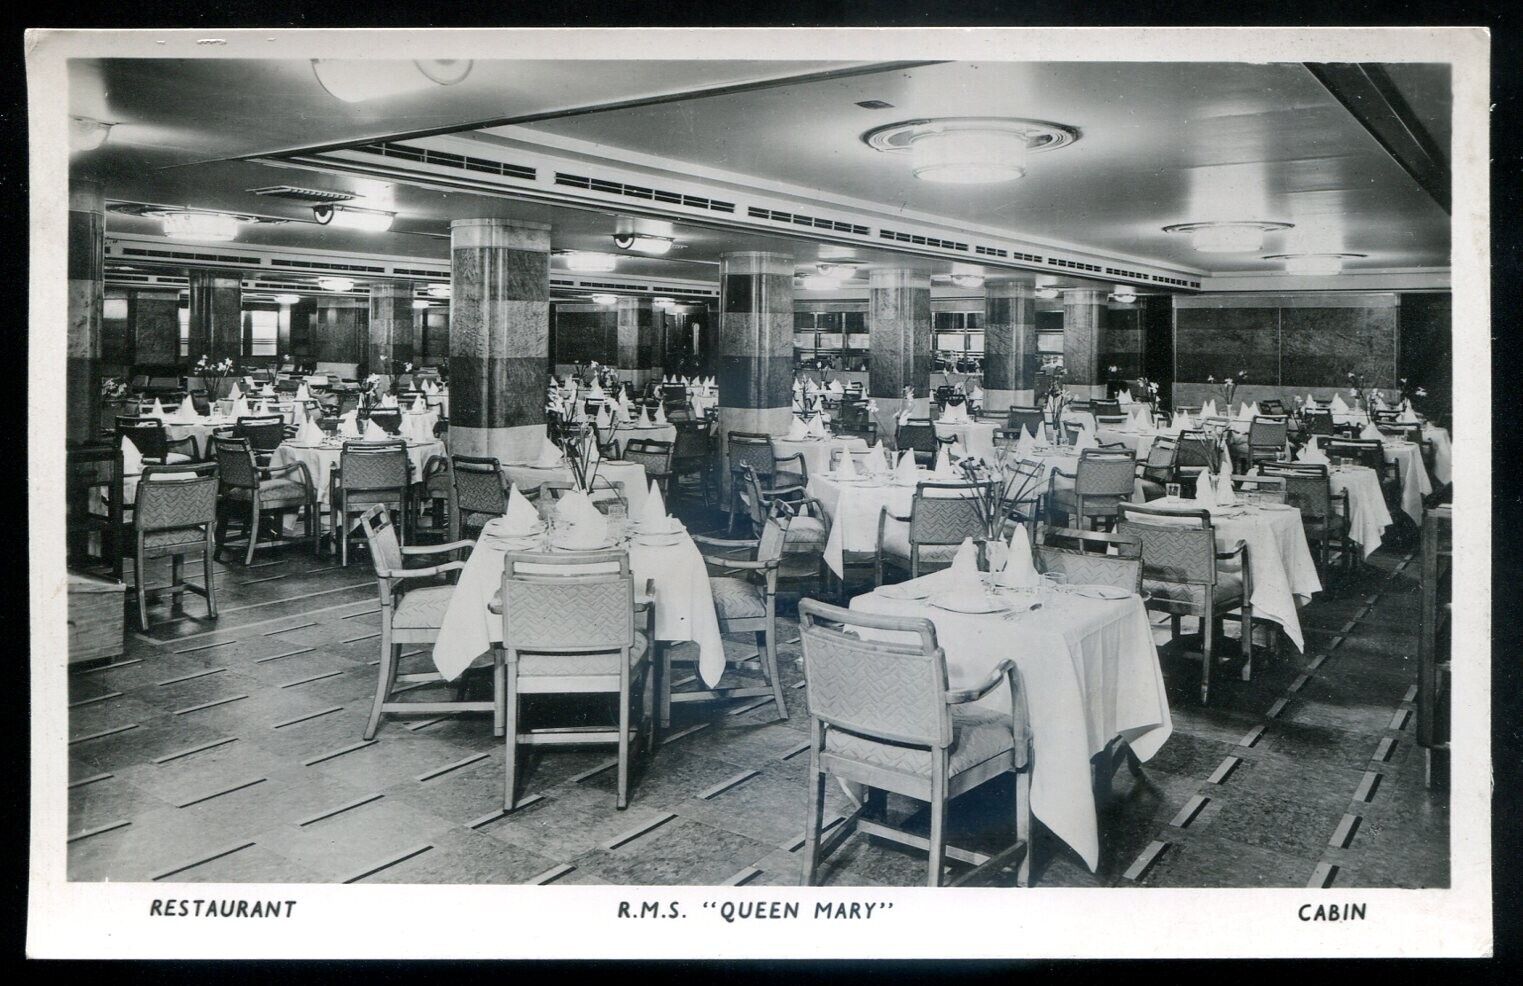 RMS QUEEN MARY 1940s Cunard Line Steamer Interior Restaurant Real Photo Postcard